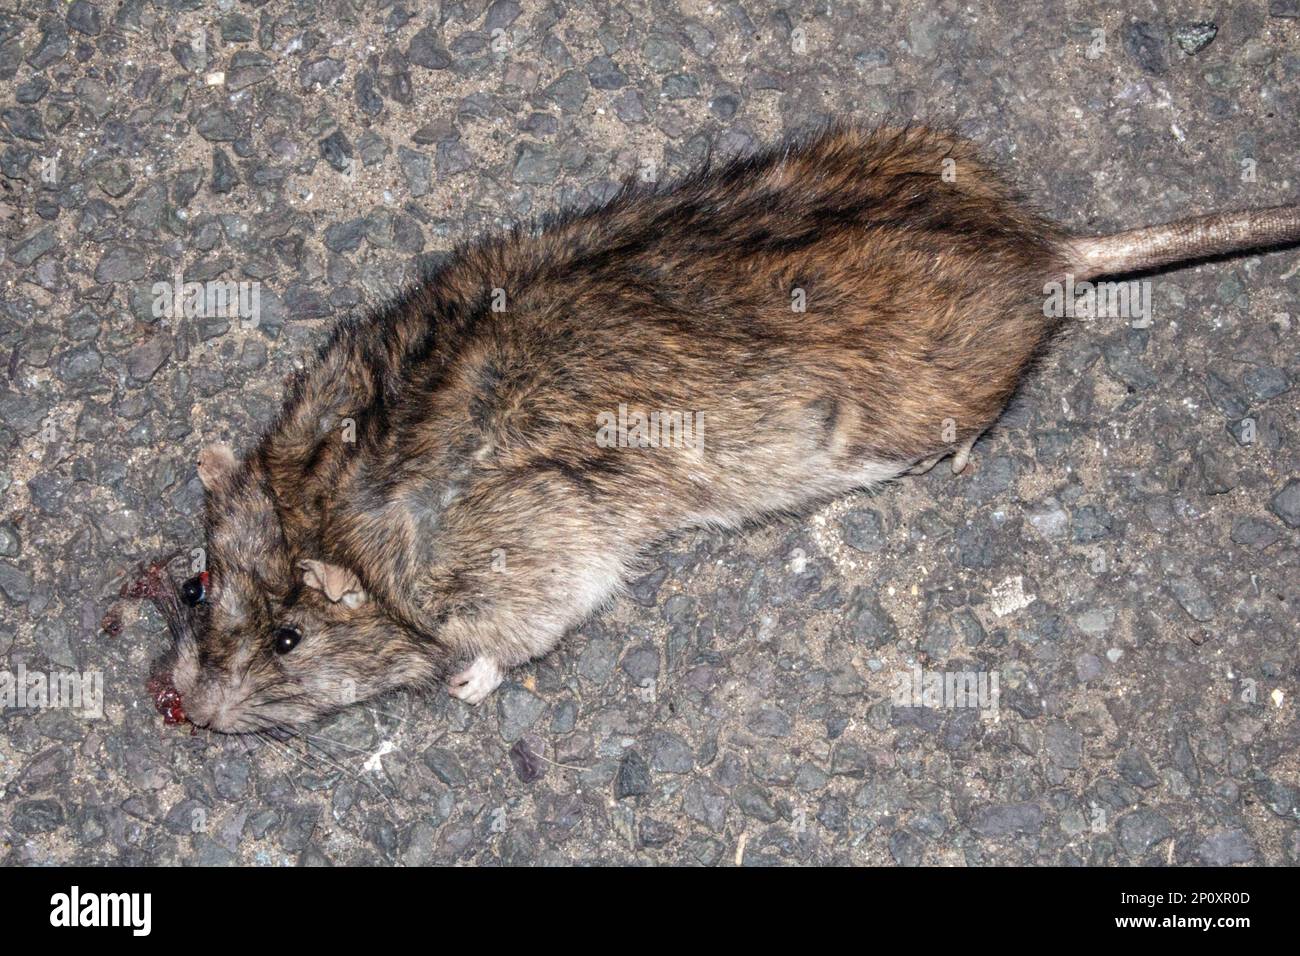 A Dead Crushed Rat that has been Run Over By A Car Wheel on a Pavement Road in an Urban Town Stock Photo